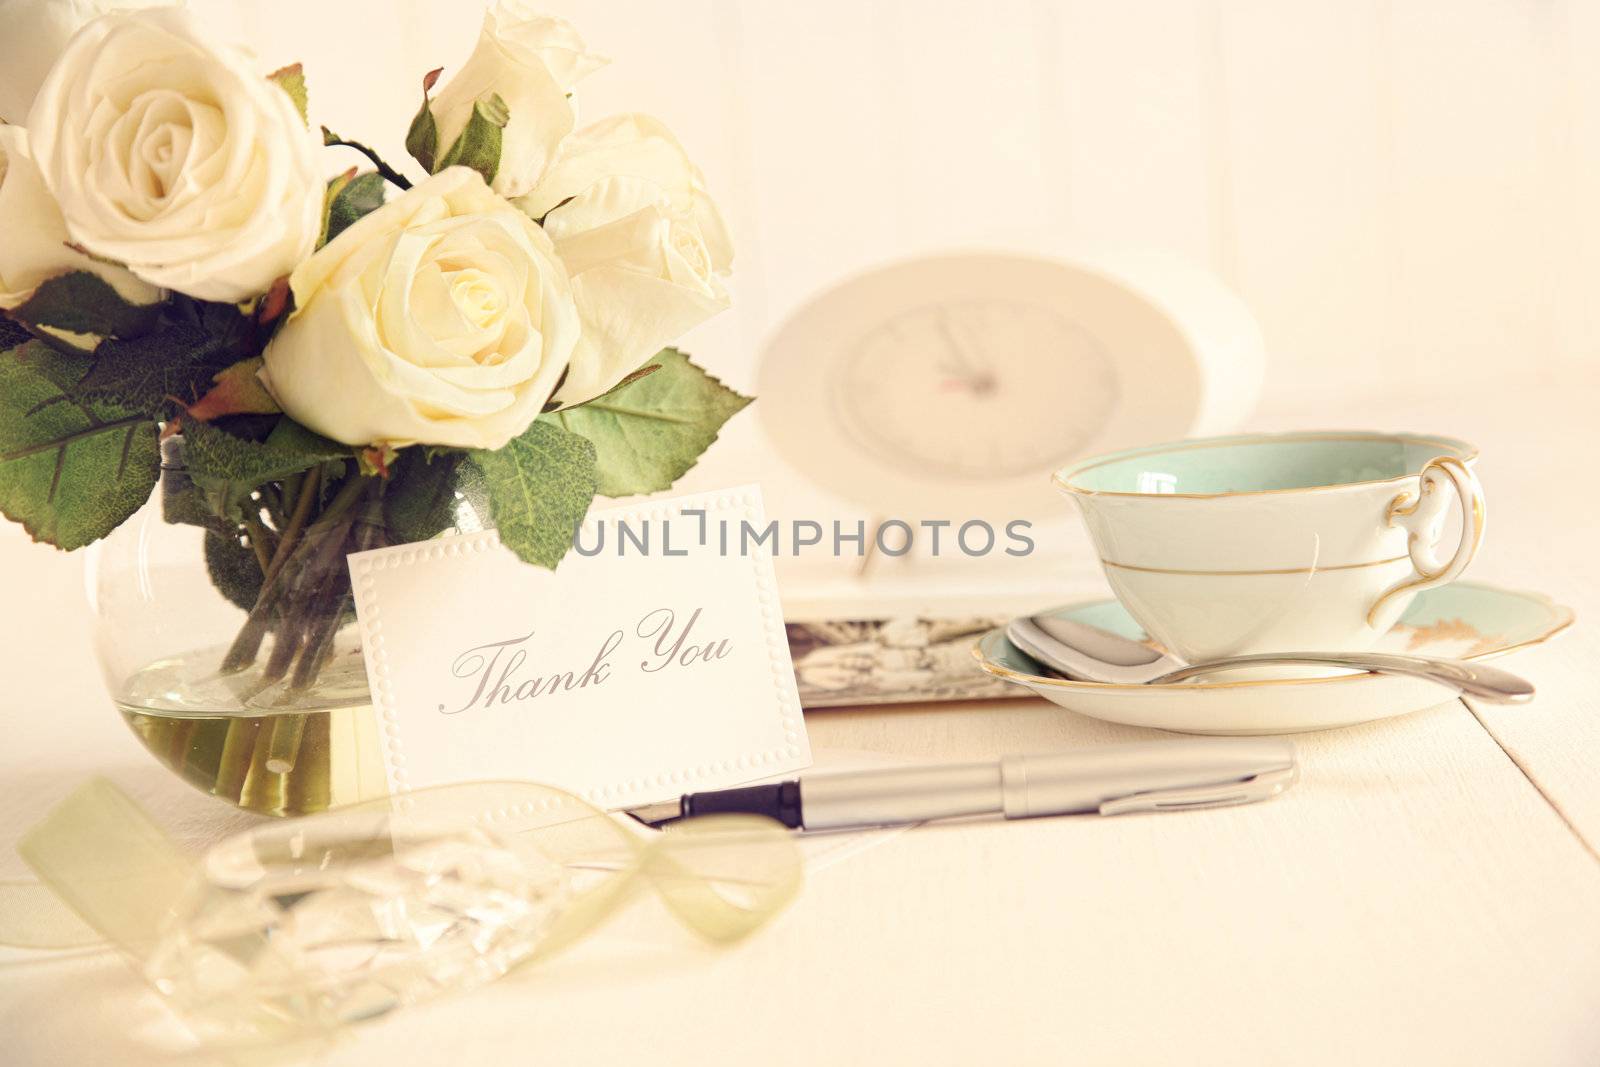 Thank you note on table with nostalgic feel by Sandralise